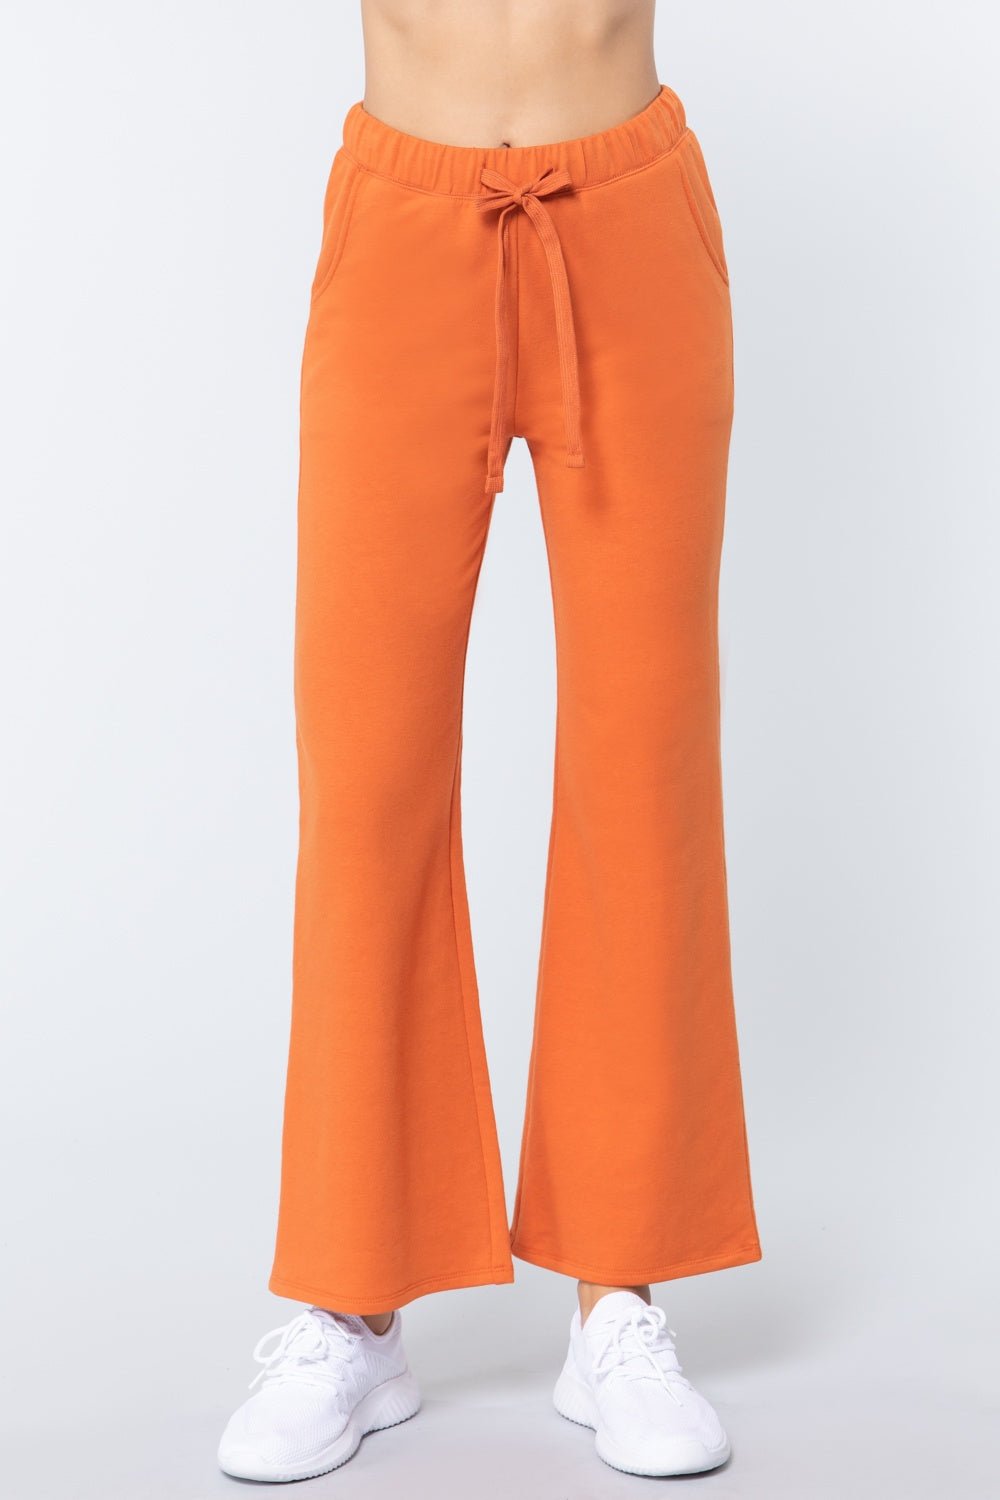 Our Best Cotton/Polyester/Spandex Blend French Terry Long Flare Pants (Orange)